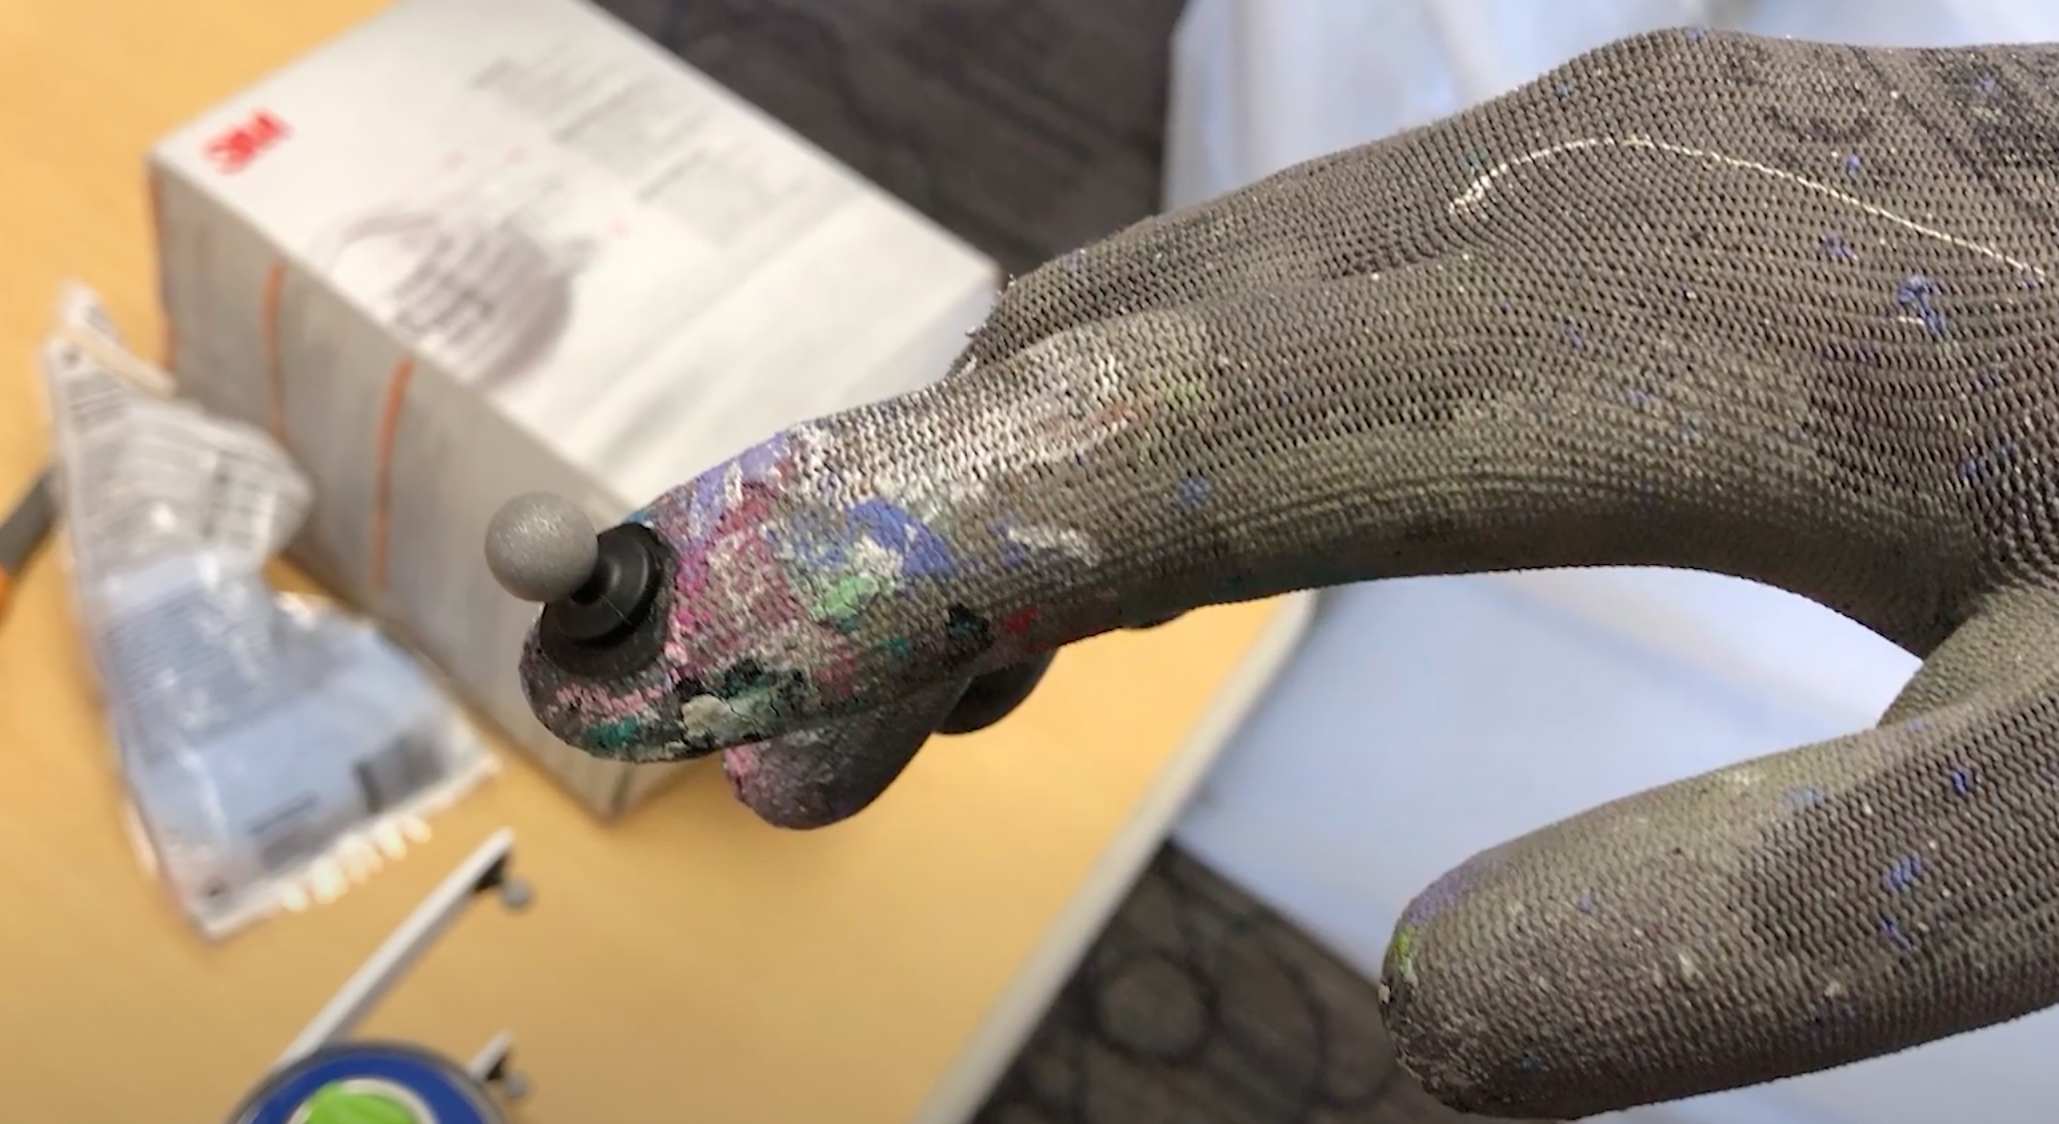 A glove with paint on it has a sensor on the fingertip that looks like a black and grey bulb.